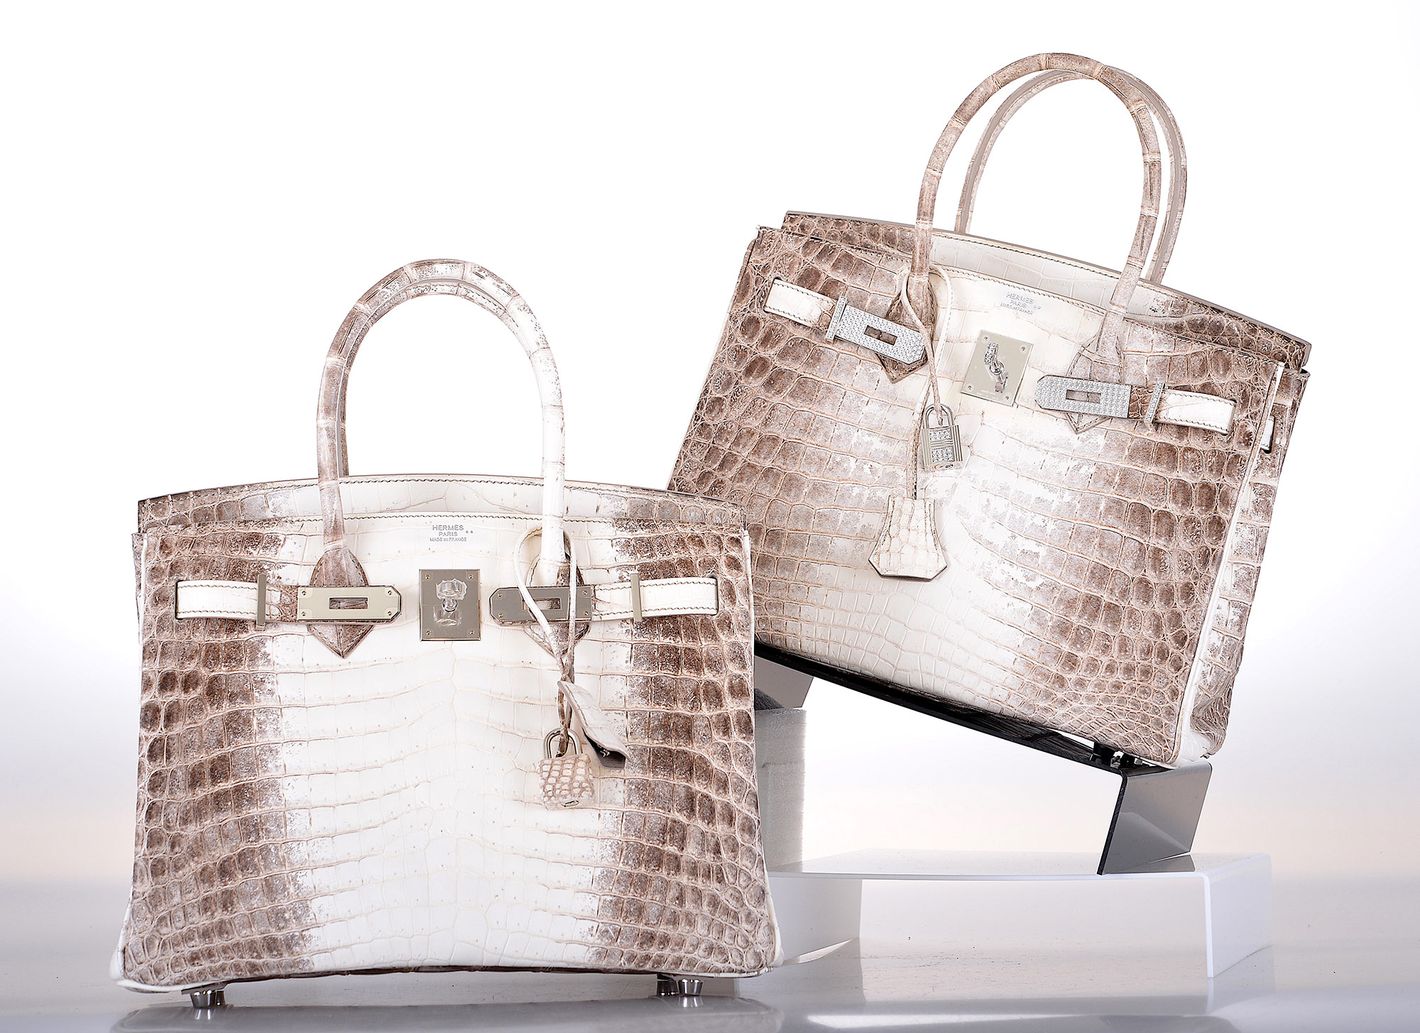 Most Valuable Luxury Bags Unlimited | Paul Smith